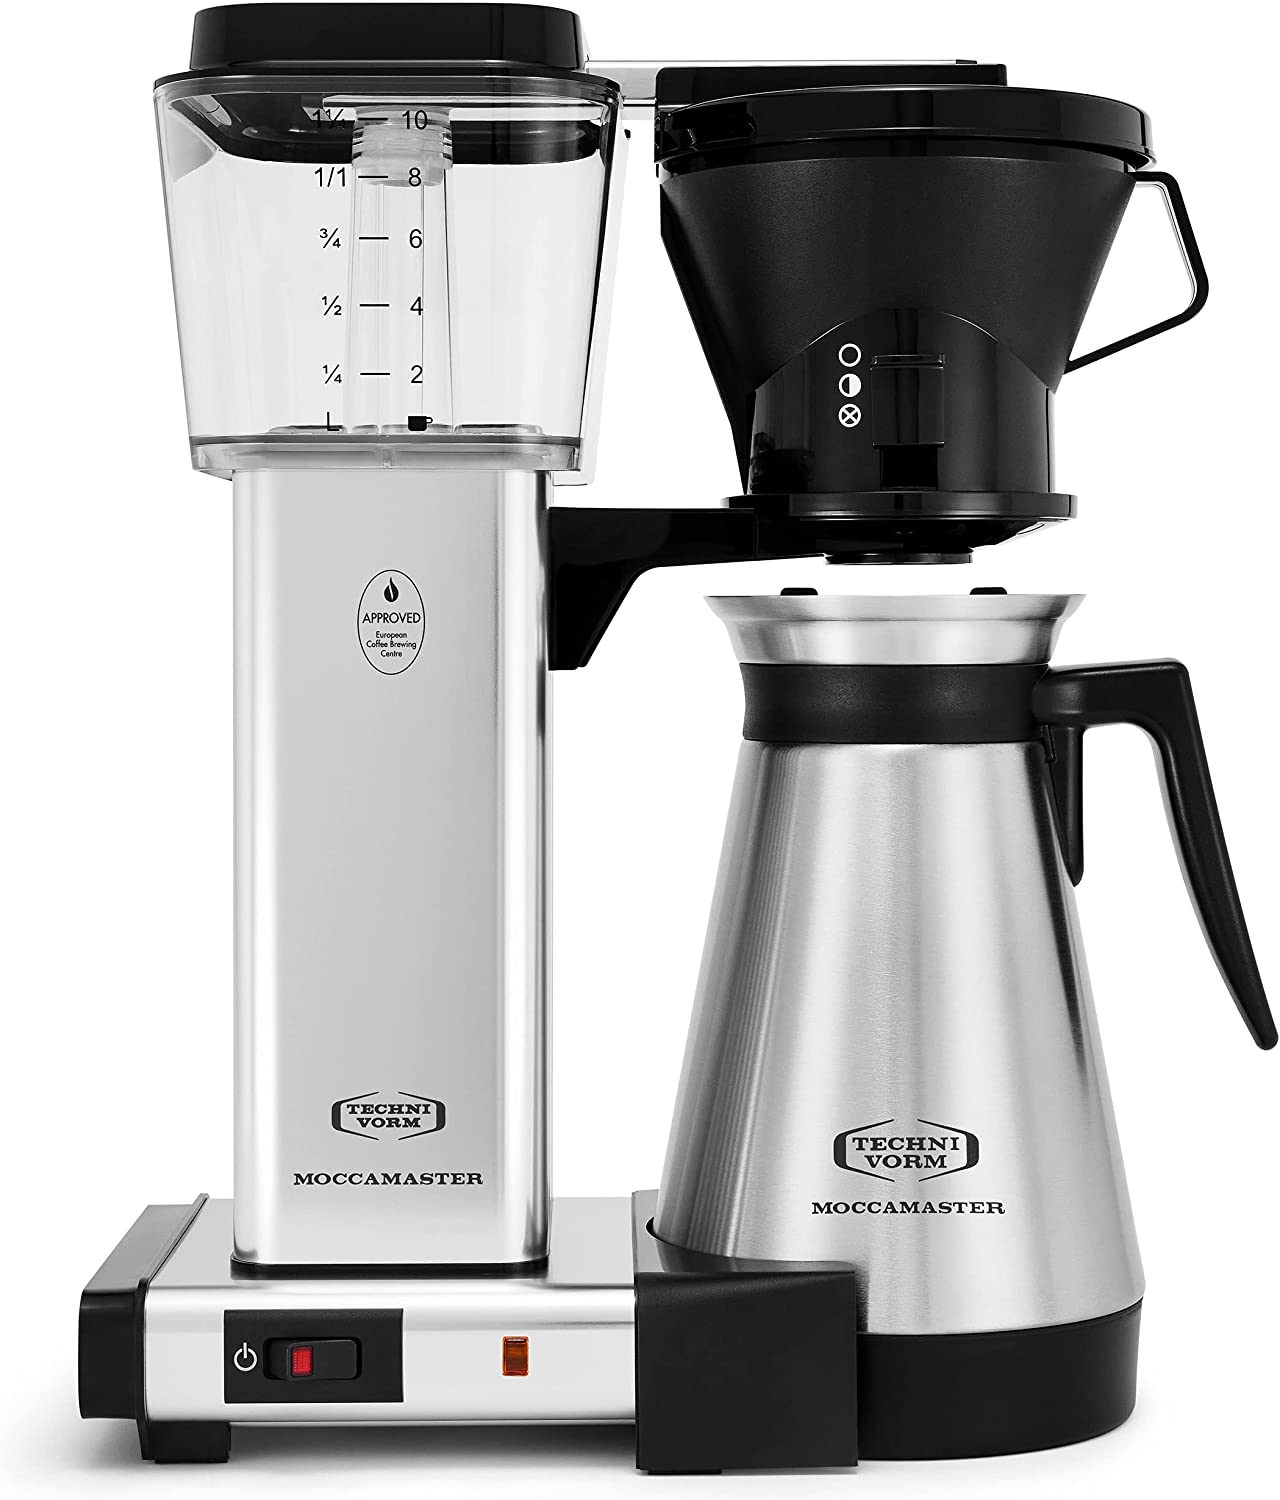 Technivorm Moccamaster KBT 741 Thermo Coffeemaker - Stainless Steel